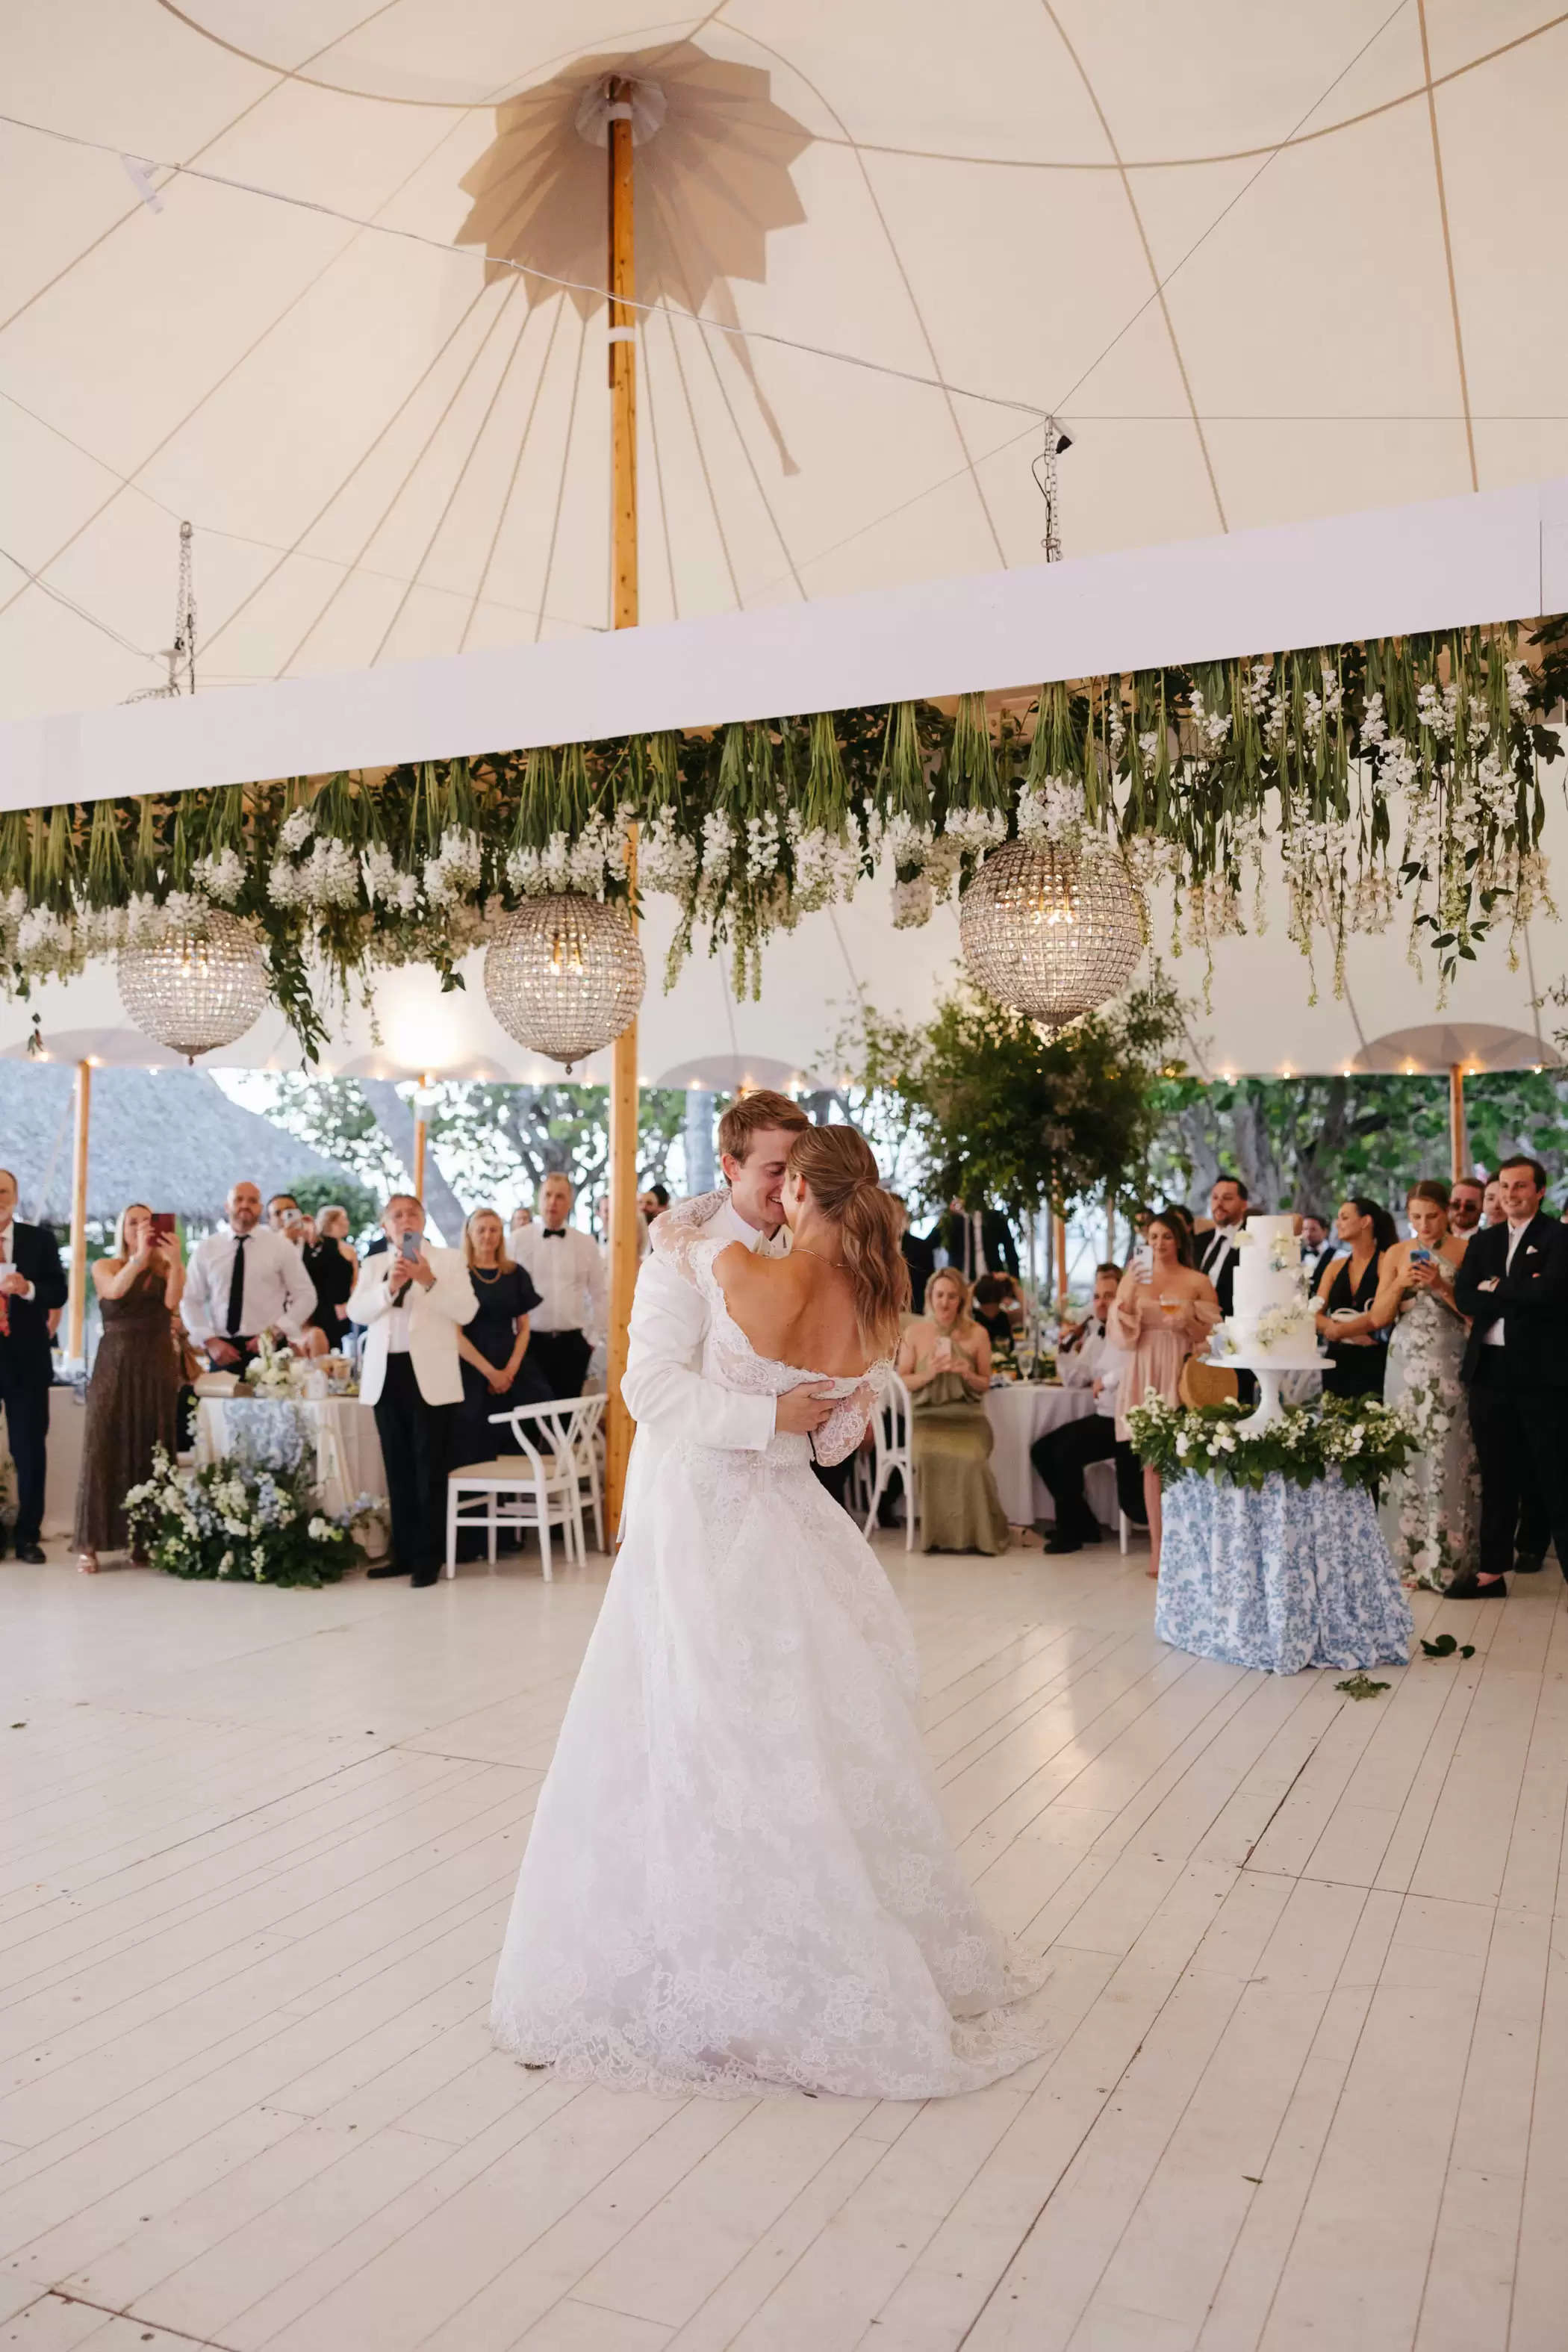 A "Coastal Backyard Get together" Wedding ceremony Crammed With Lovely Blue + White Particulars